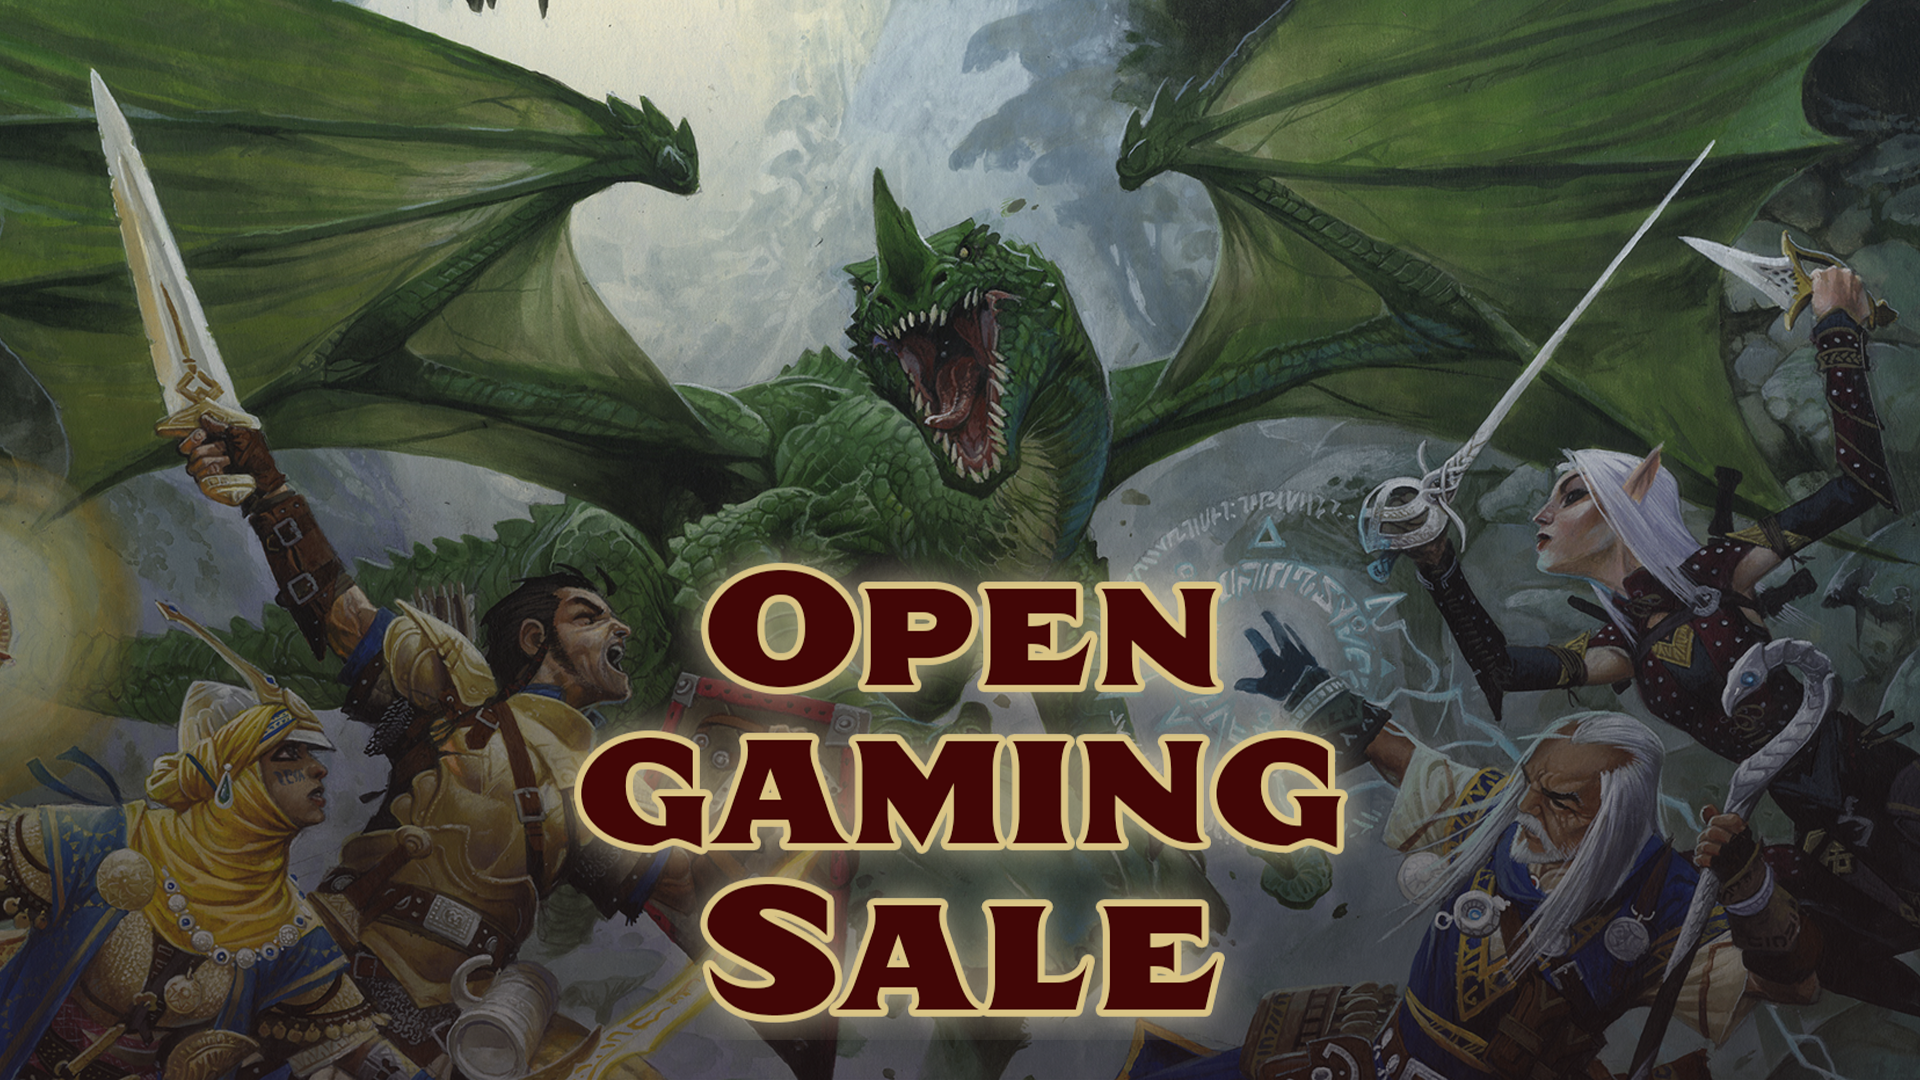 Open Gaming Sale text over-layed over an image of the pathfinder Iconics battling a flying green dragon